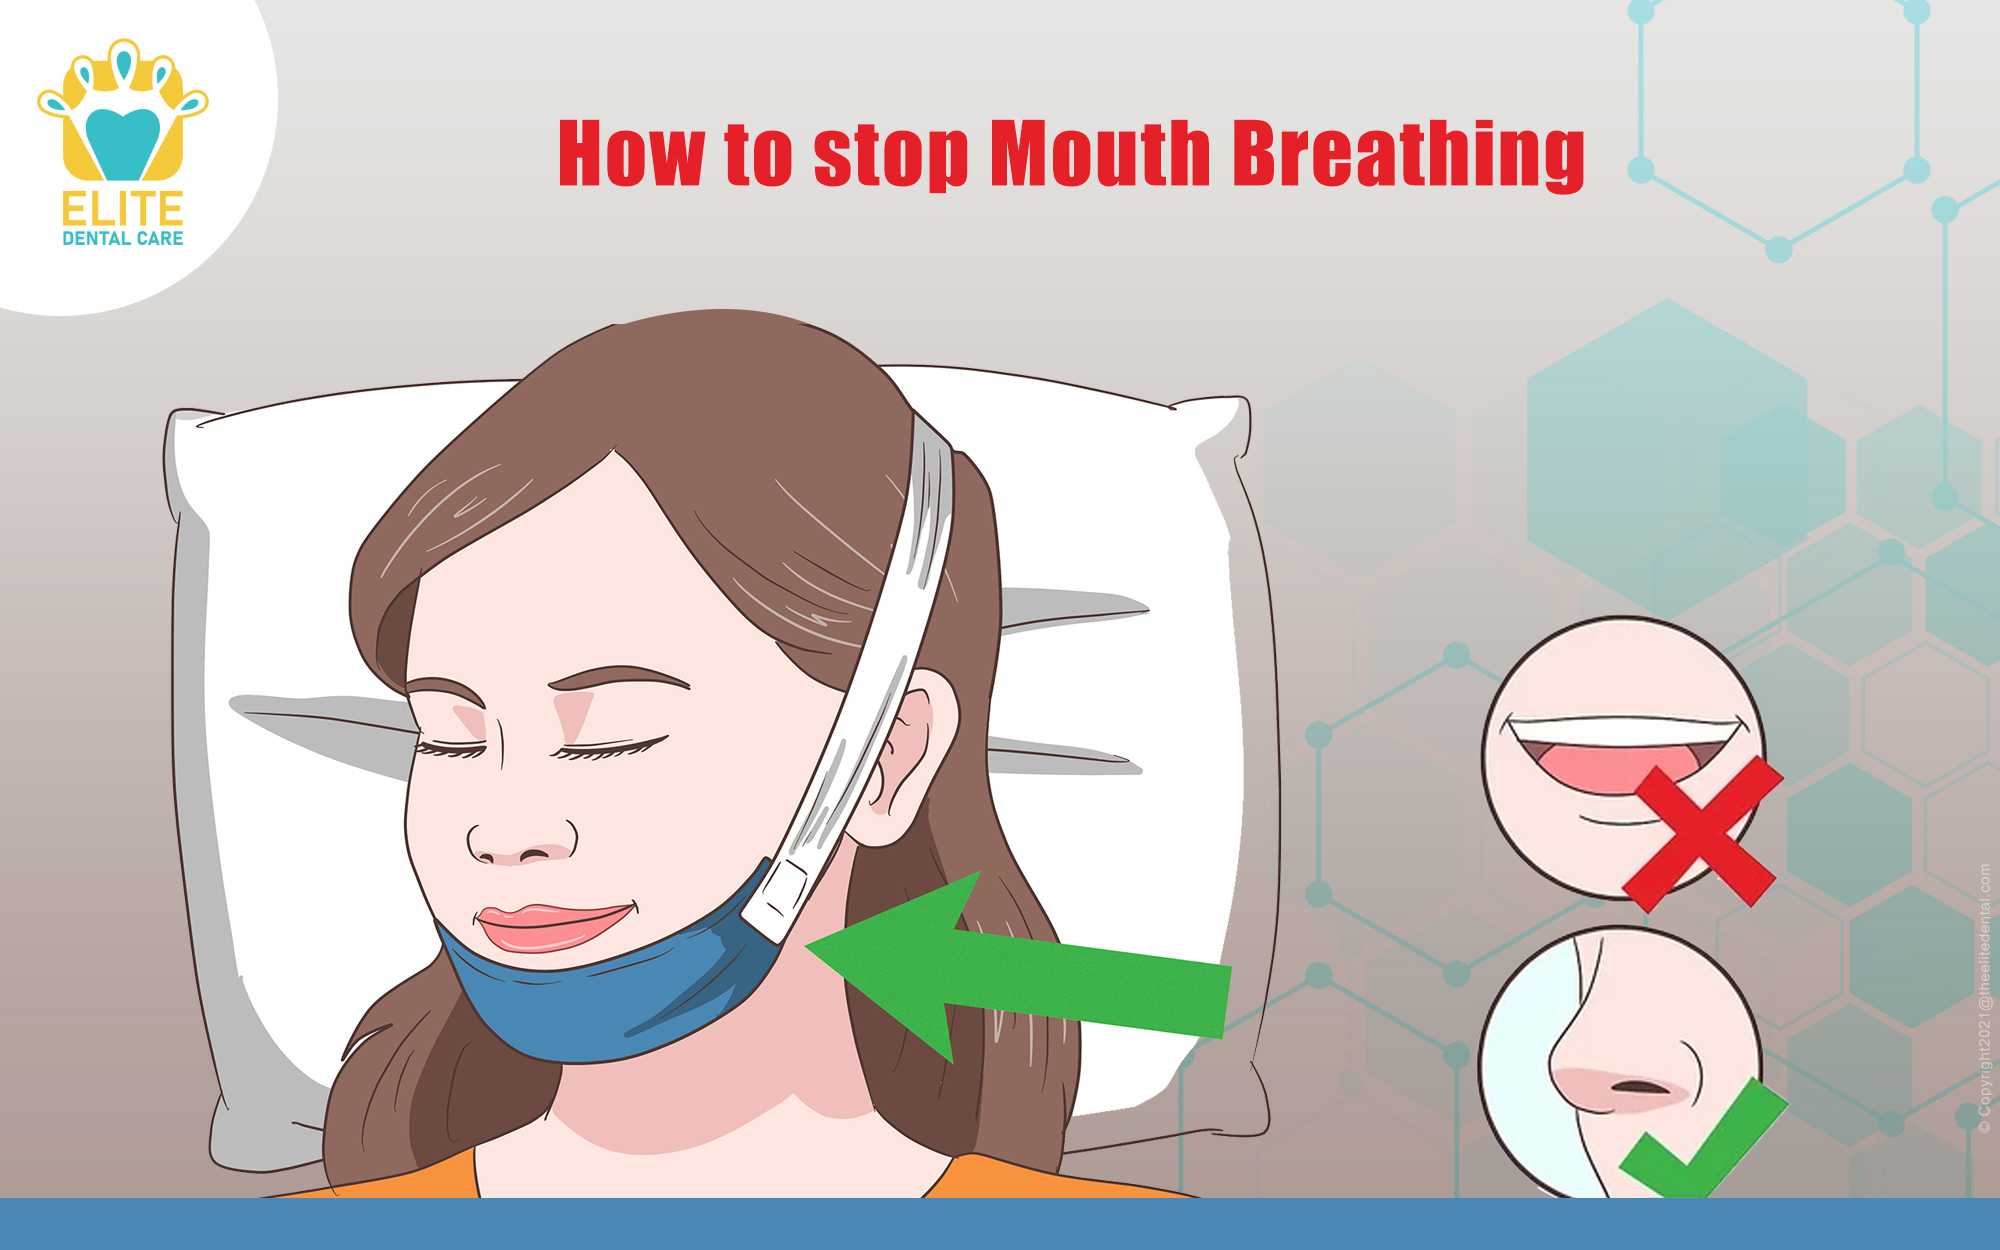 HOW TO STOP MOUTH BREATHING?